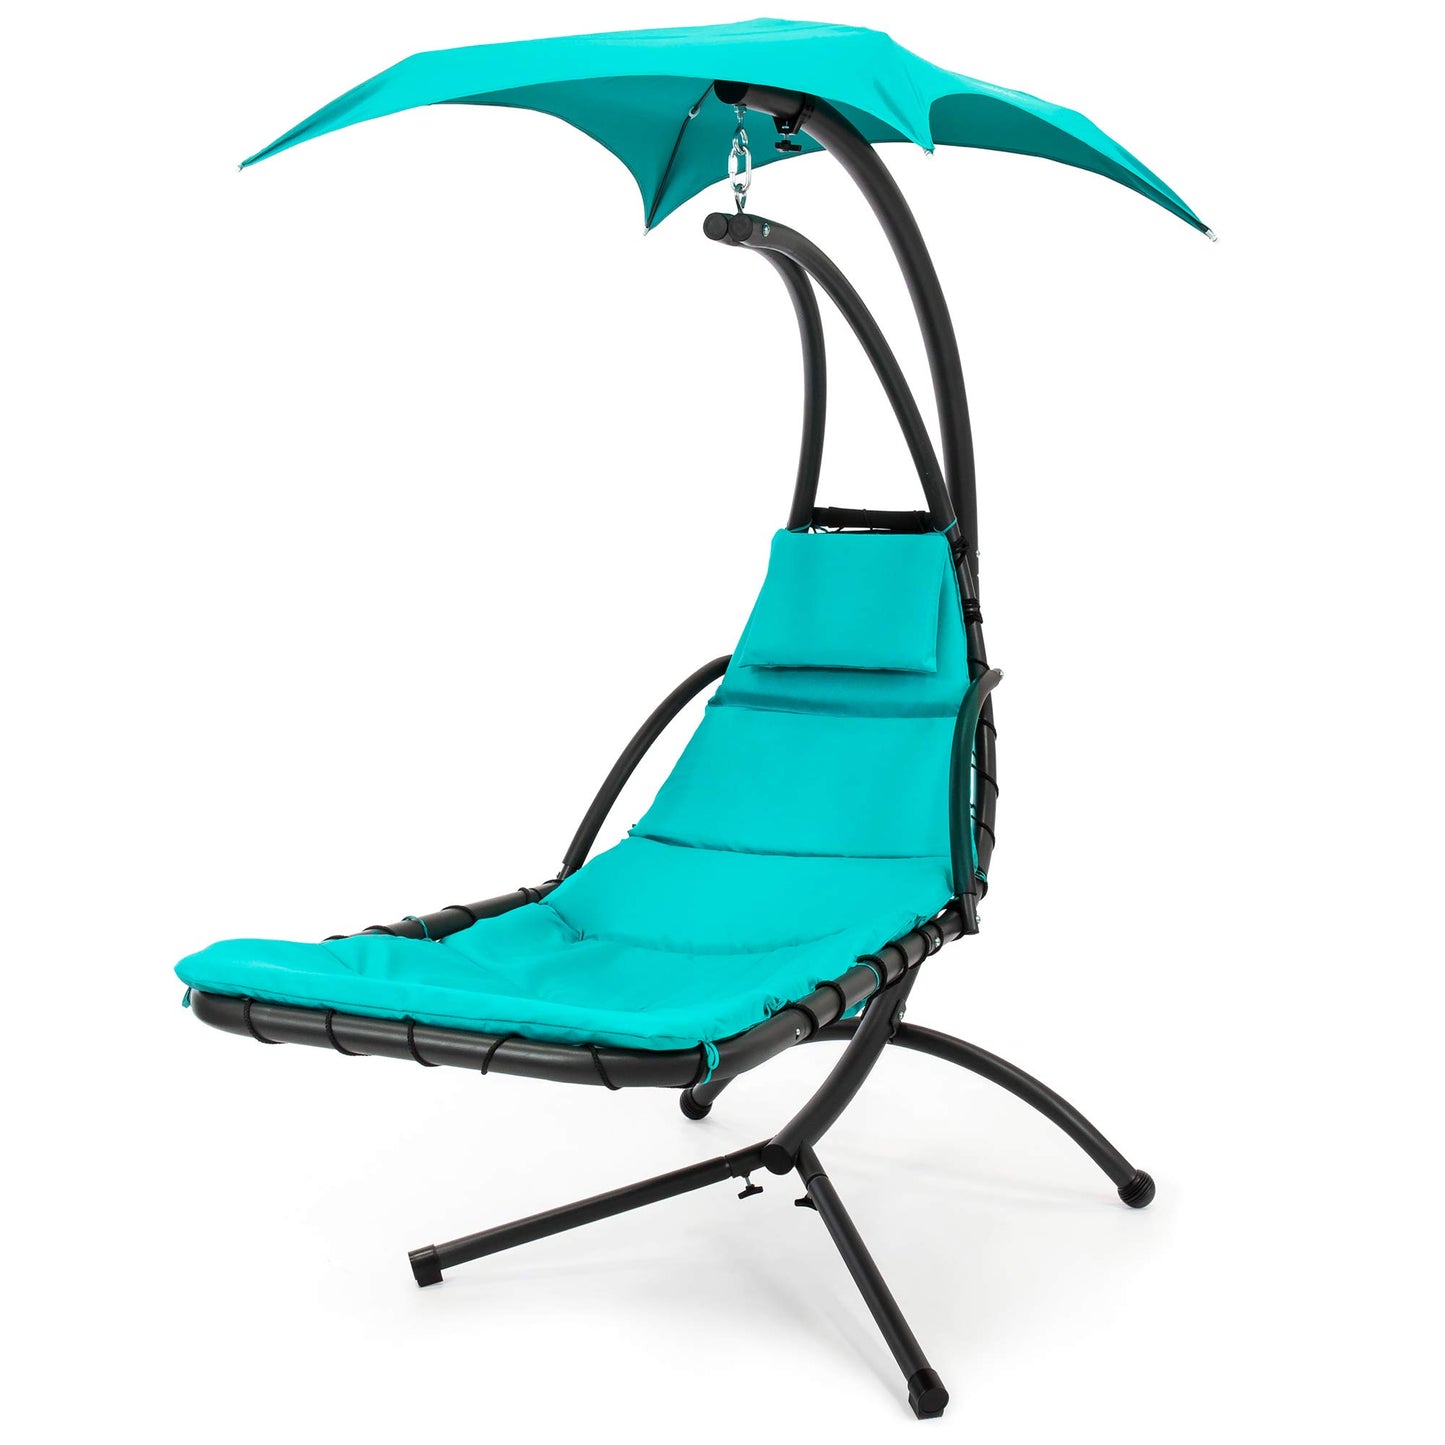 Hanging Curved Chaise Lounge Chair - Best Choice Products